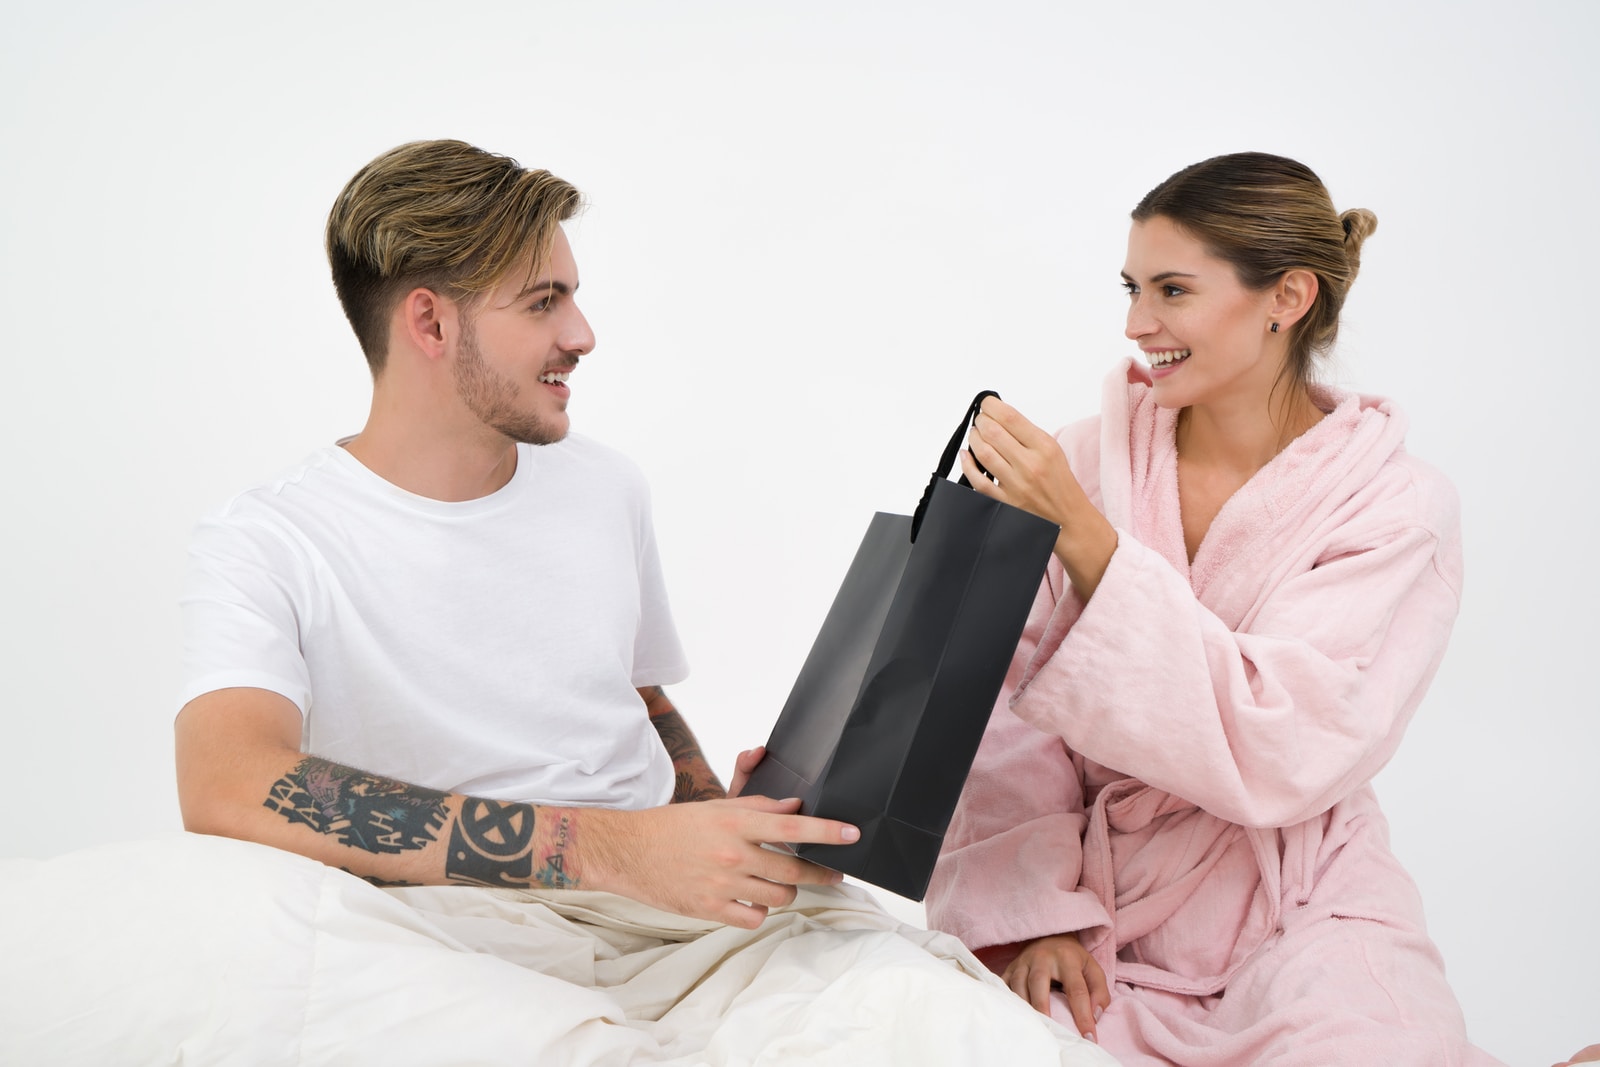 Receiving Gifts Love Language- The Complete Guide